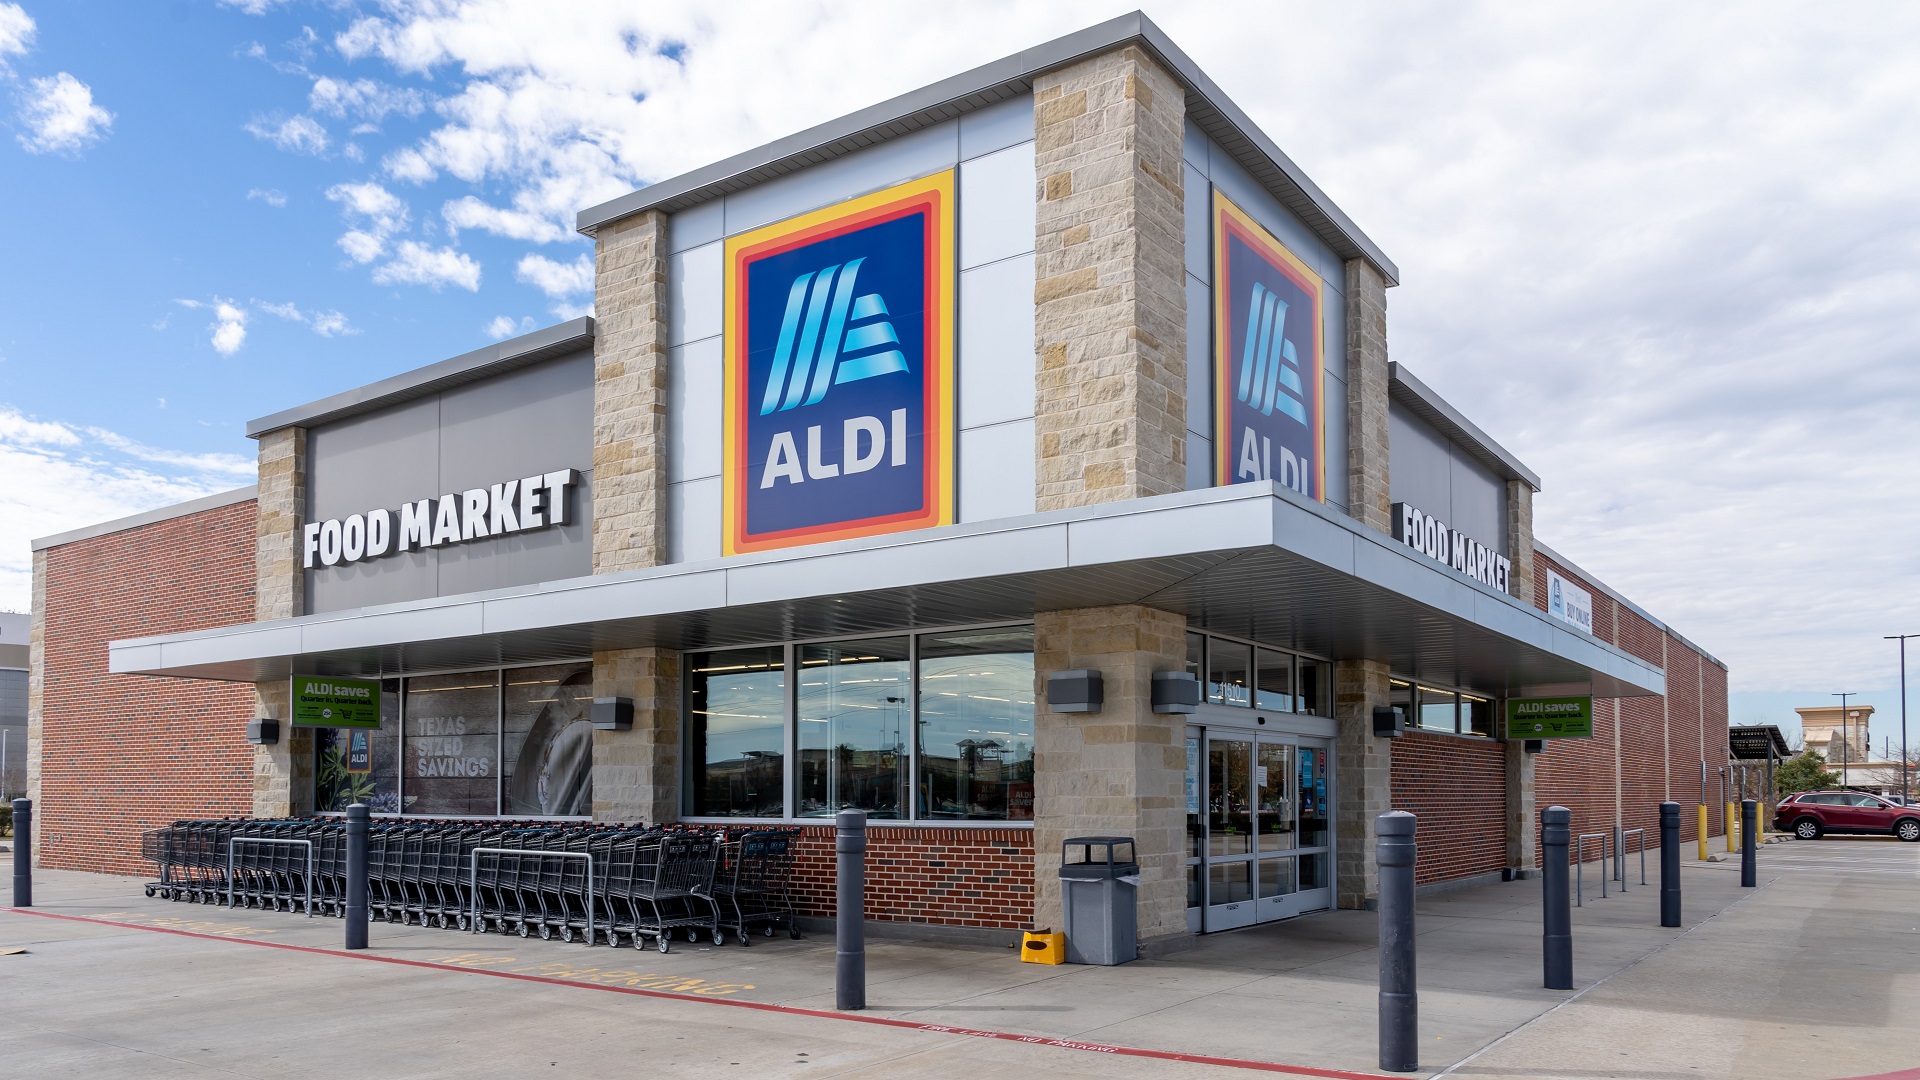 13 Myths About Shopping at Aldi